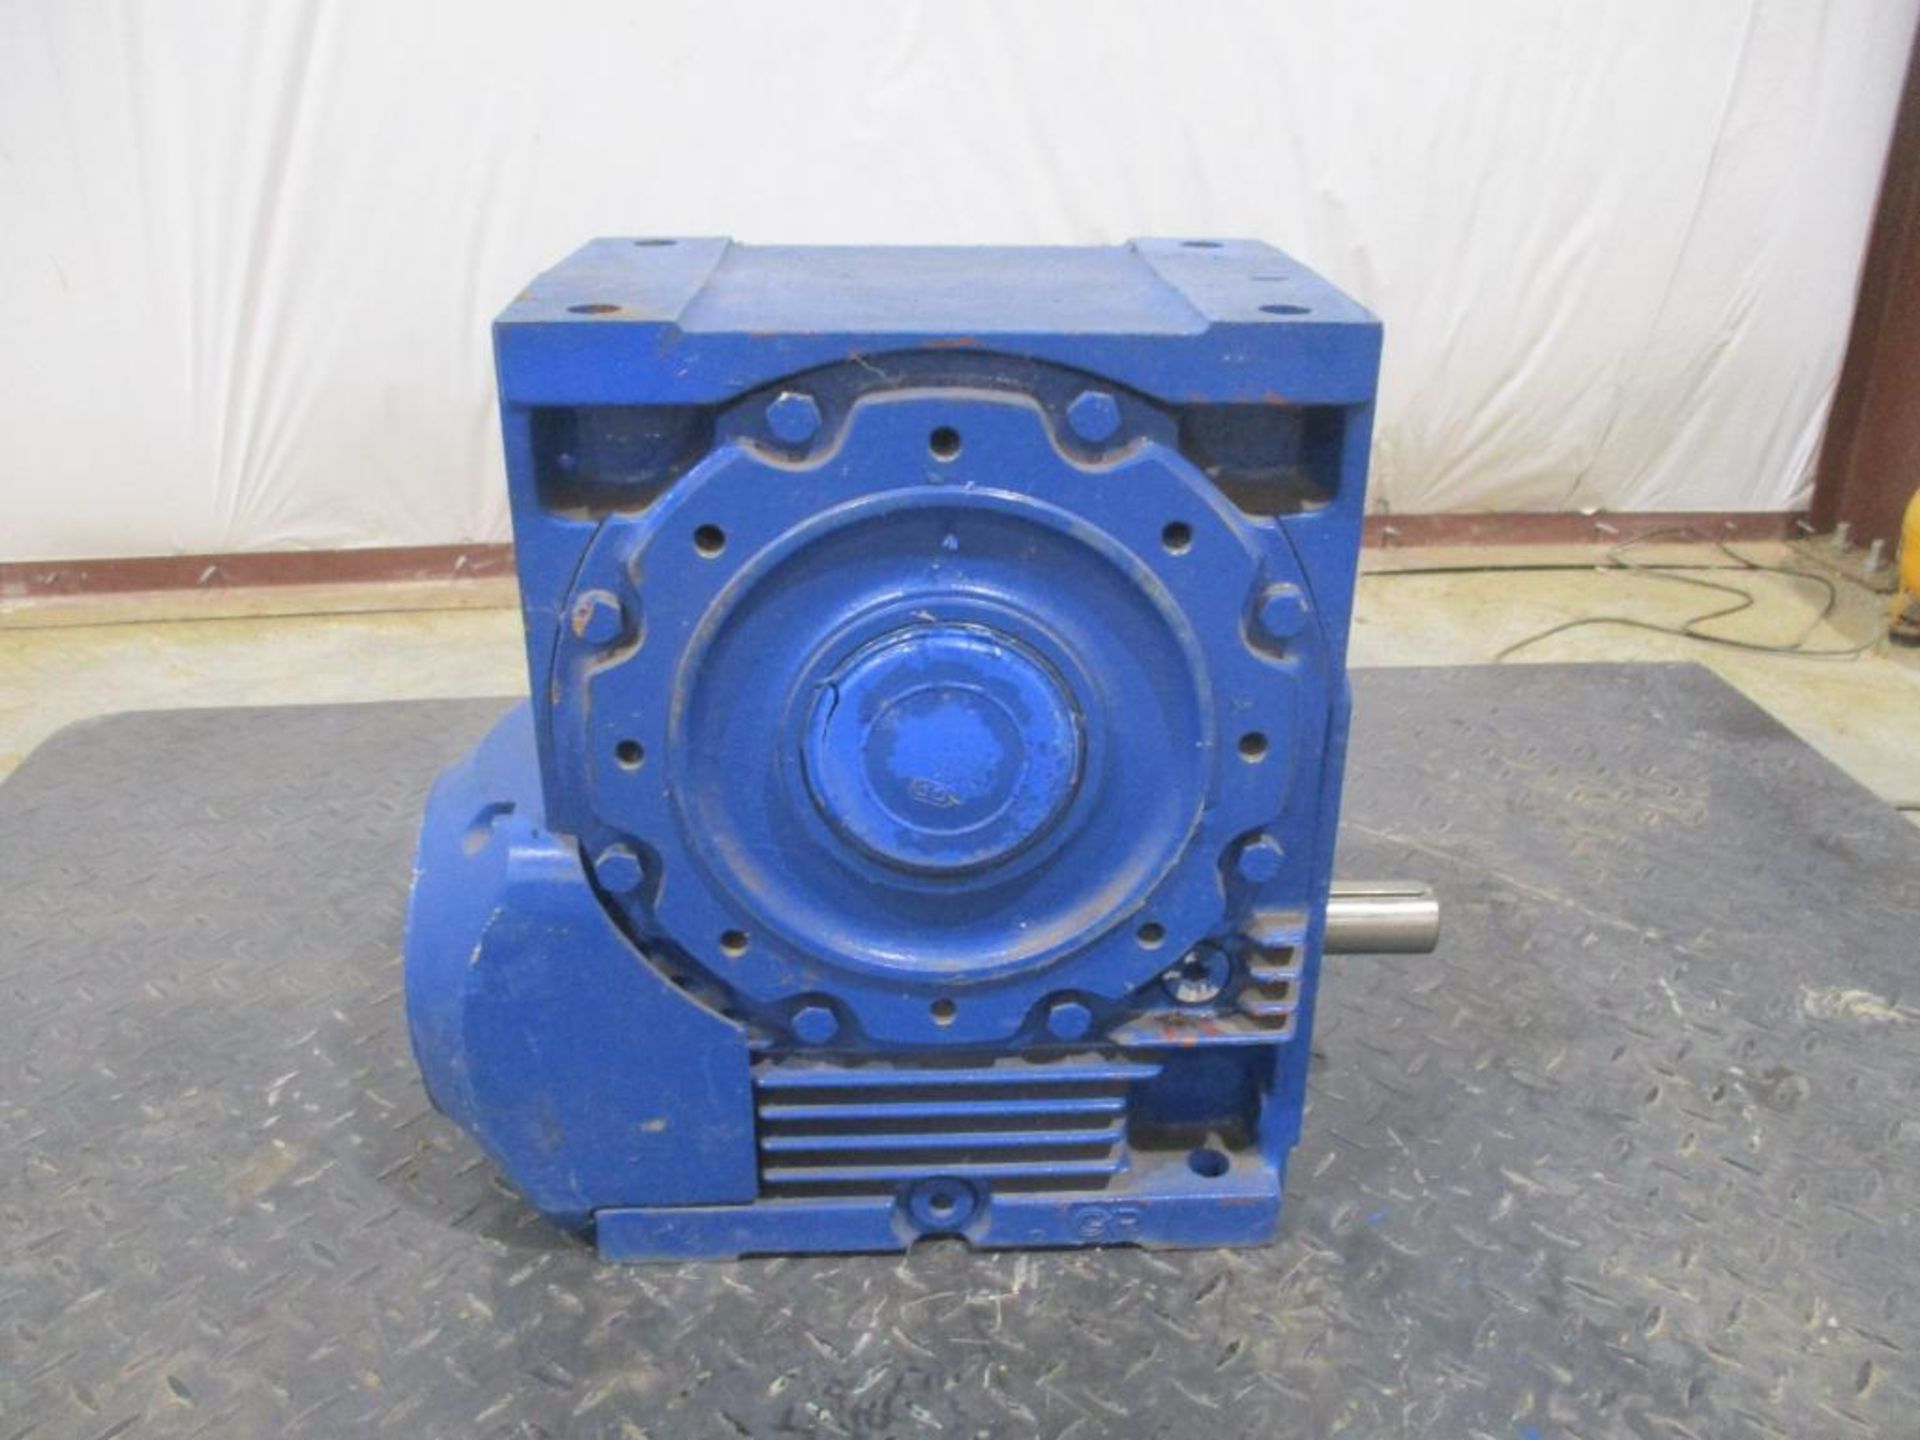 ROSSI MOTORIDUTTORI 32 RATIO REDUCER P/N RV160U02A, 279# lbs (There will be a $40 Rigging/Prep fee a